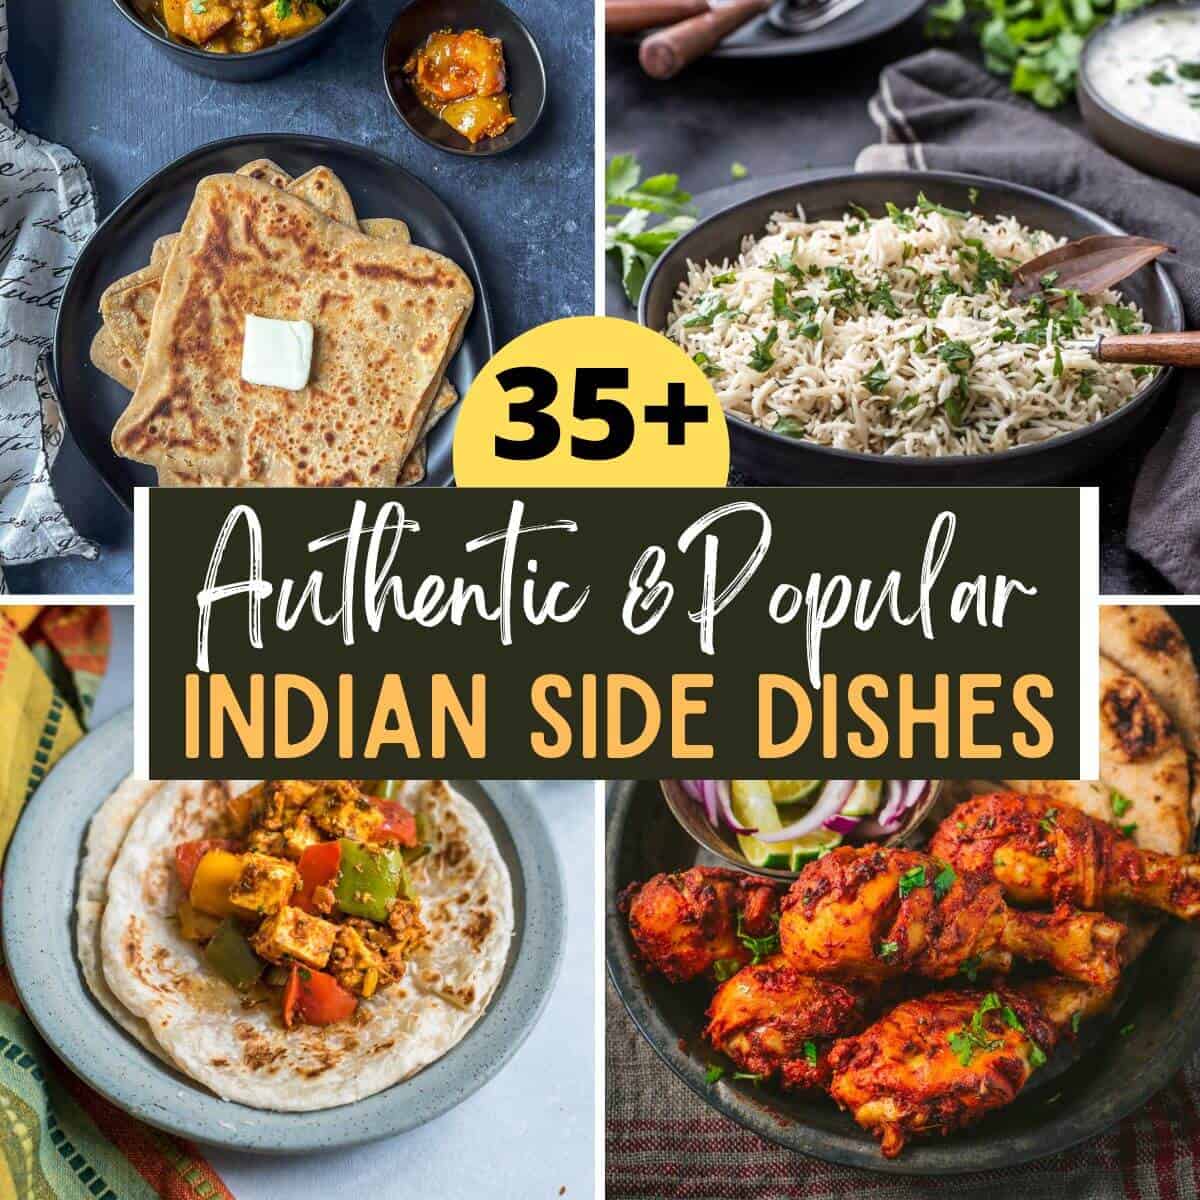 35+ Popular Indian side dishes to go with your meal